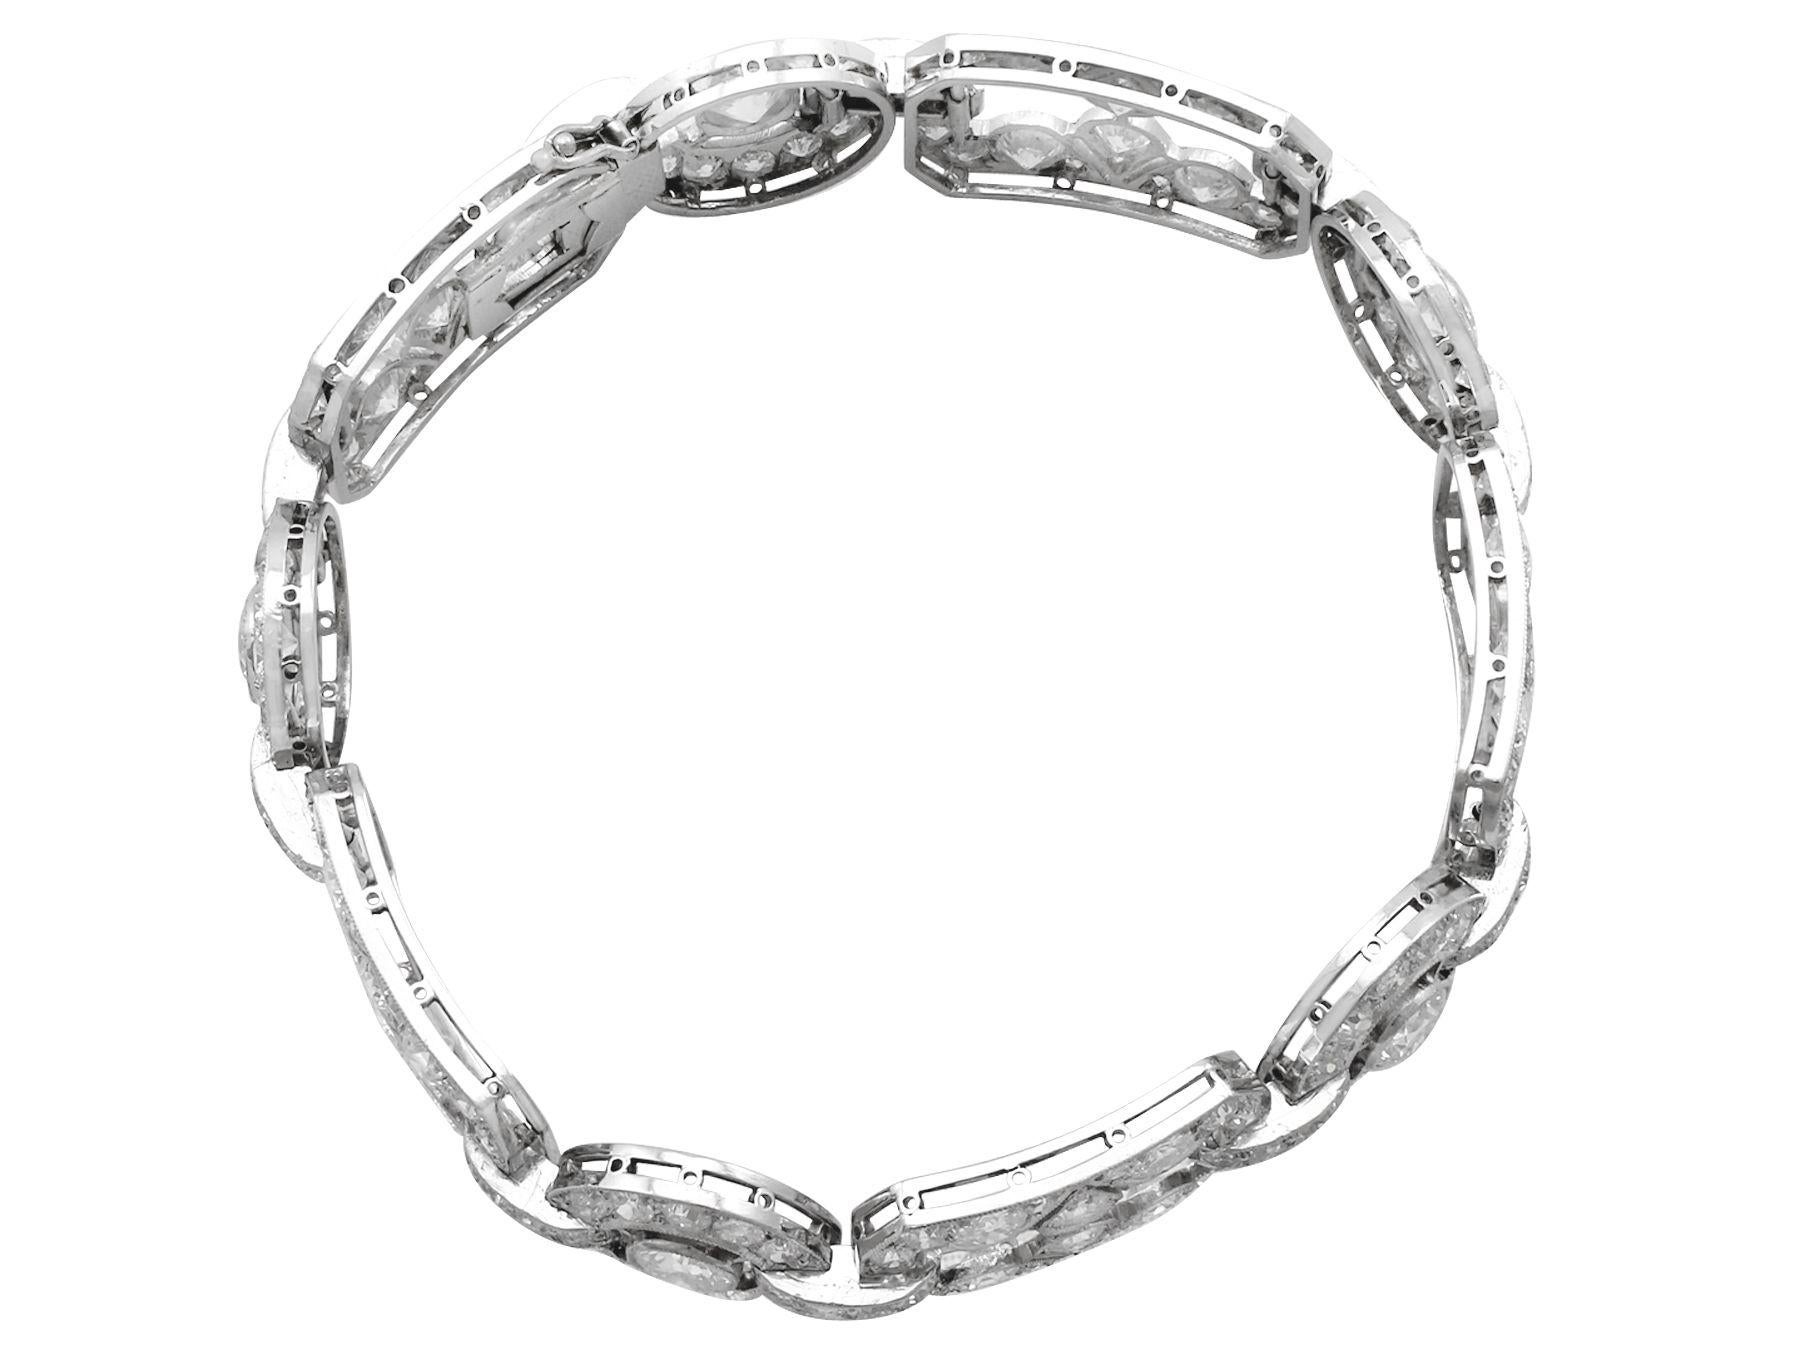 A stunning antique Art Deco 12.29 carat diamond and platinum bracelet and presentation case; part of our diverse antique estate jewelry collections.

This stunning, fine and impressive Art Deco diamond bracelet has been crafted in platinum.

The